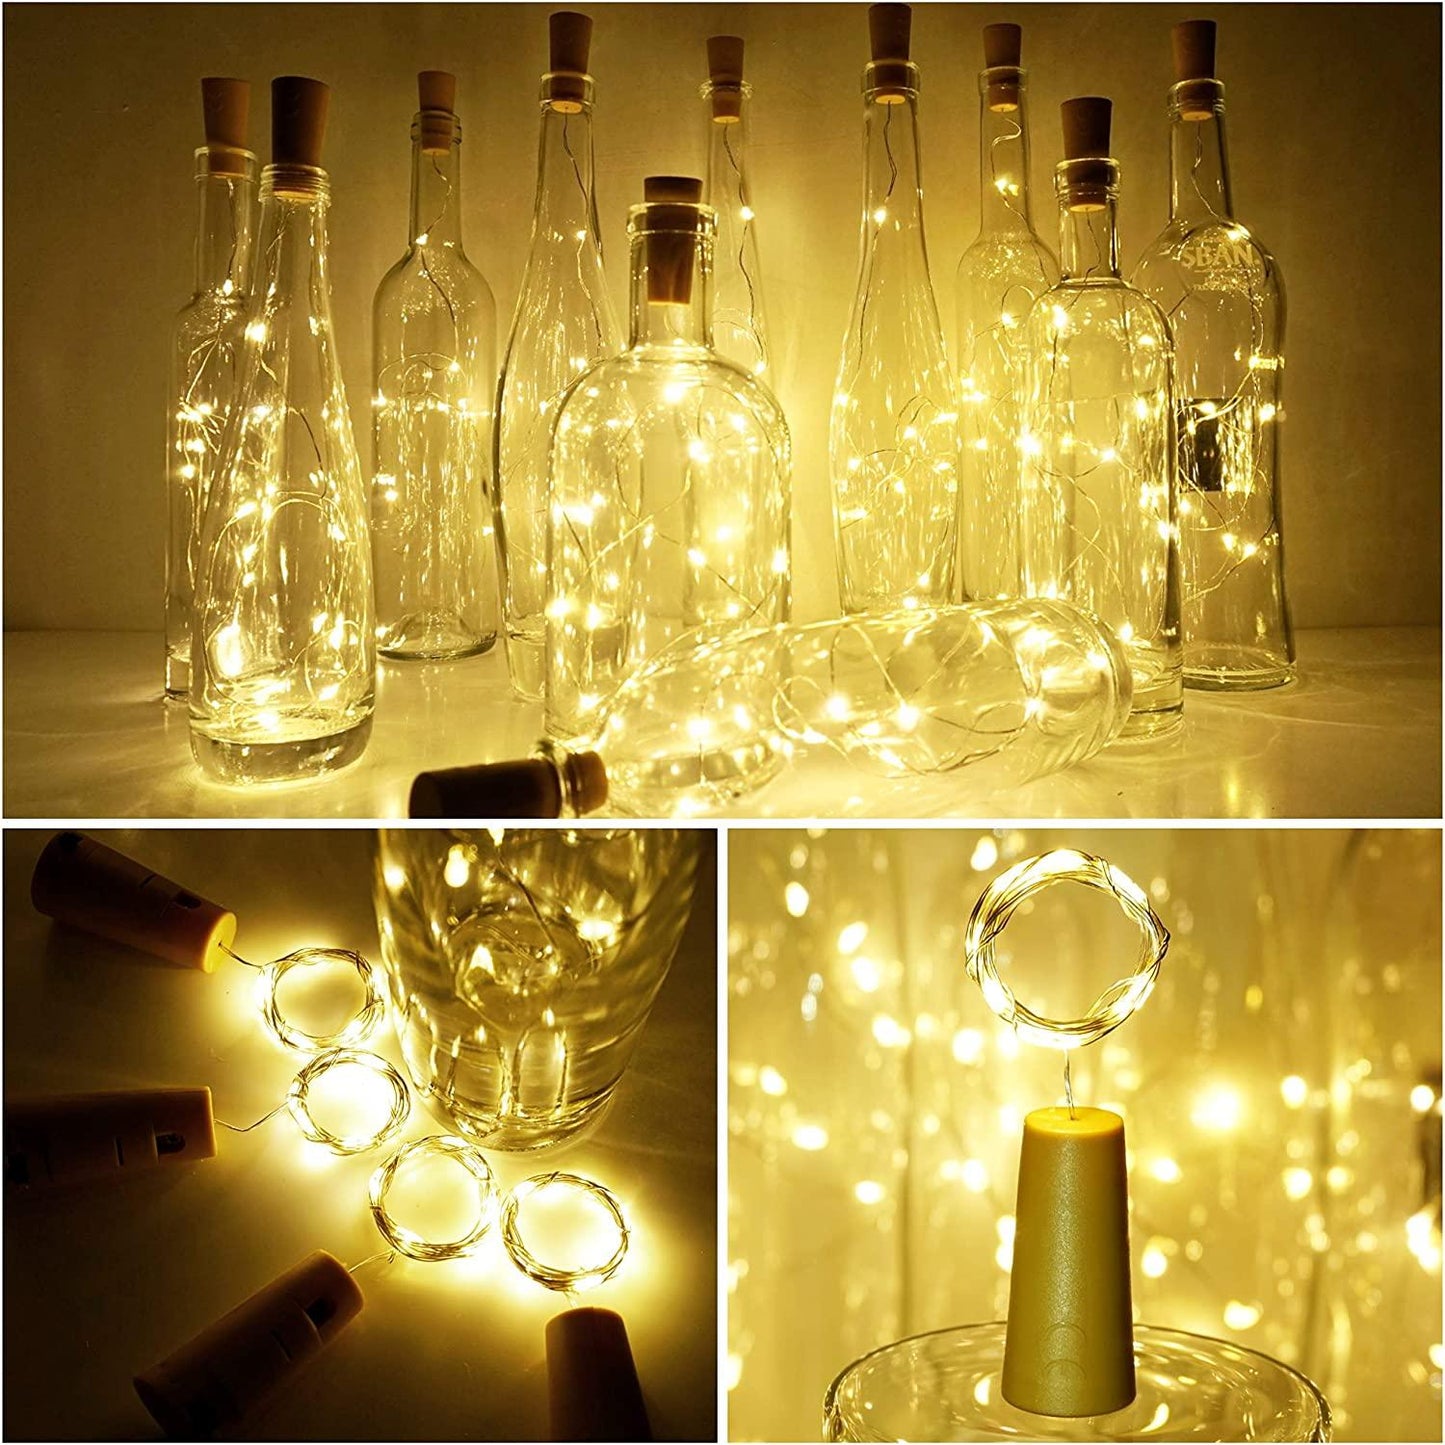 Wine Bottle Lights with Cork for Thanksgiving - If you say i do